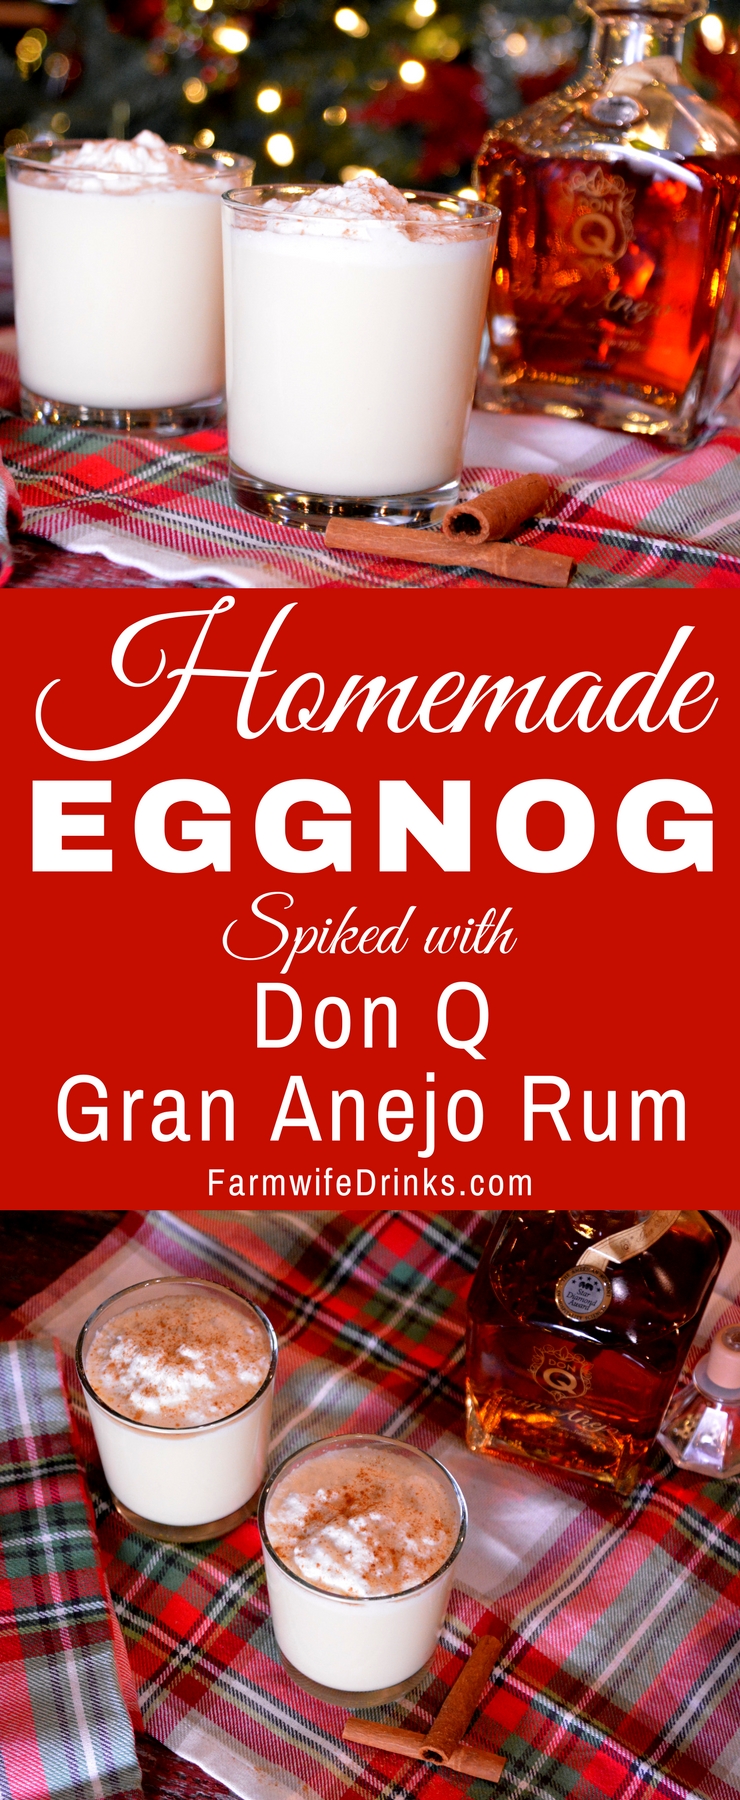 If you love eggnog and want to make a special homemade version, this homemade eggnog recipe is decadent and rich and pairs perfectly with Don Q Gran Anejo Rum.